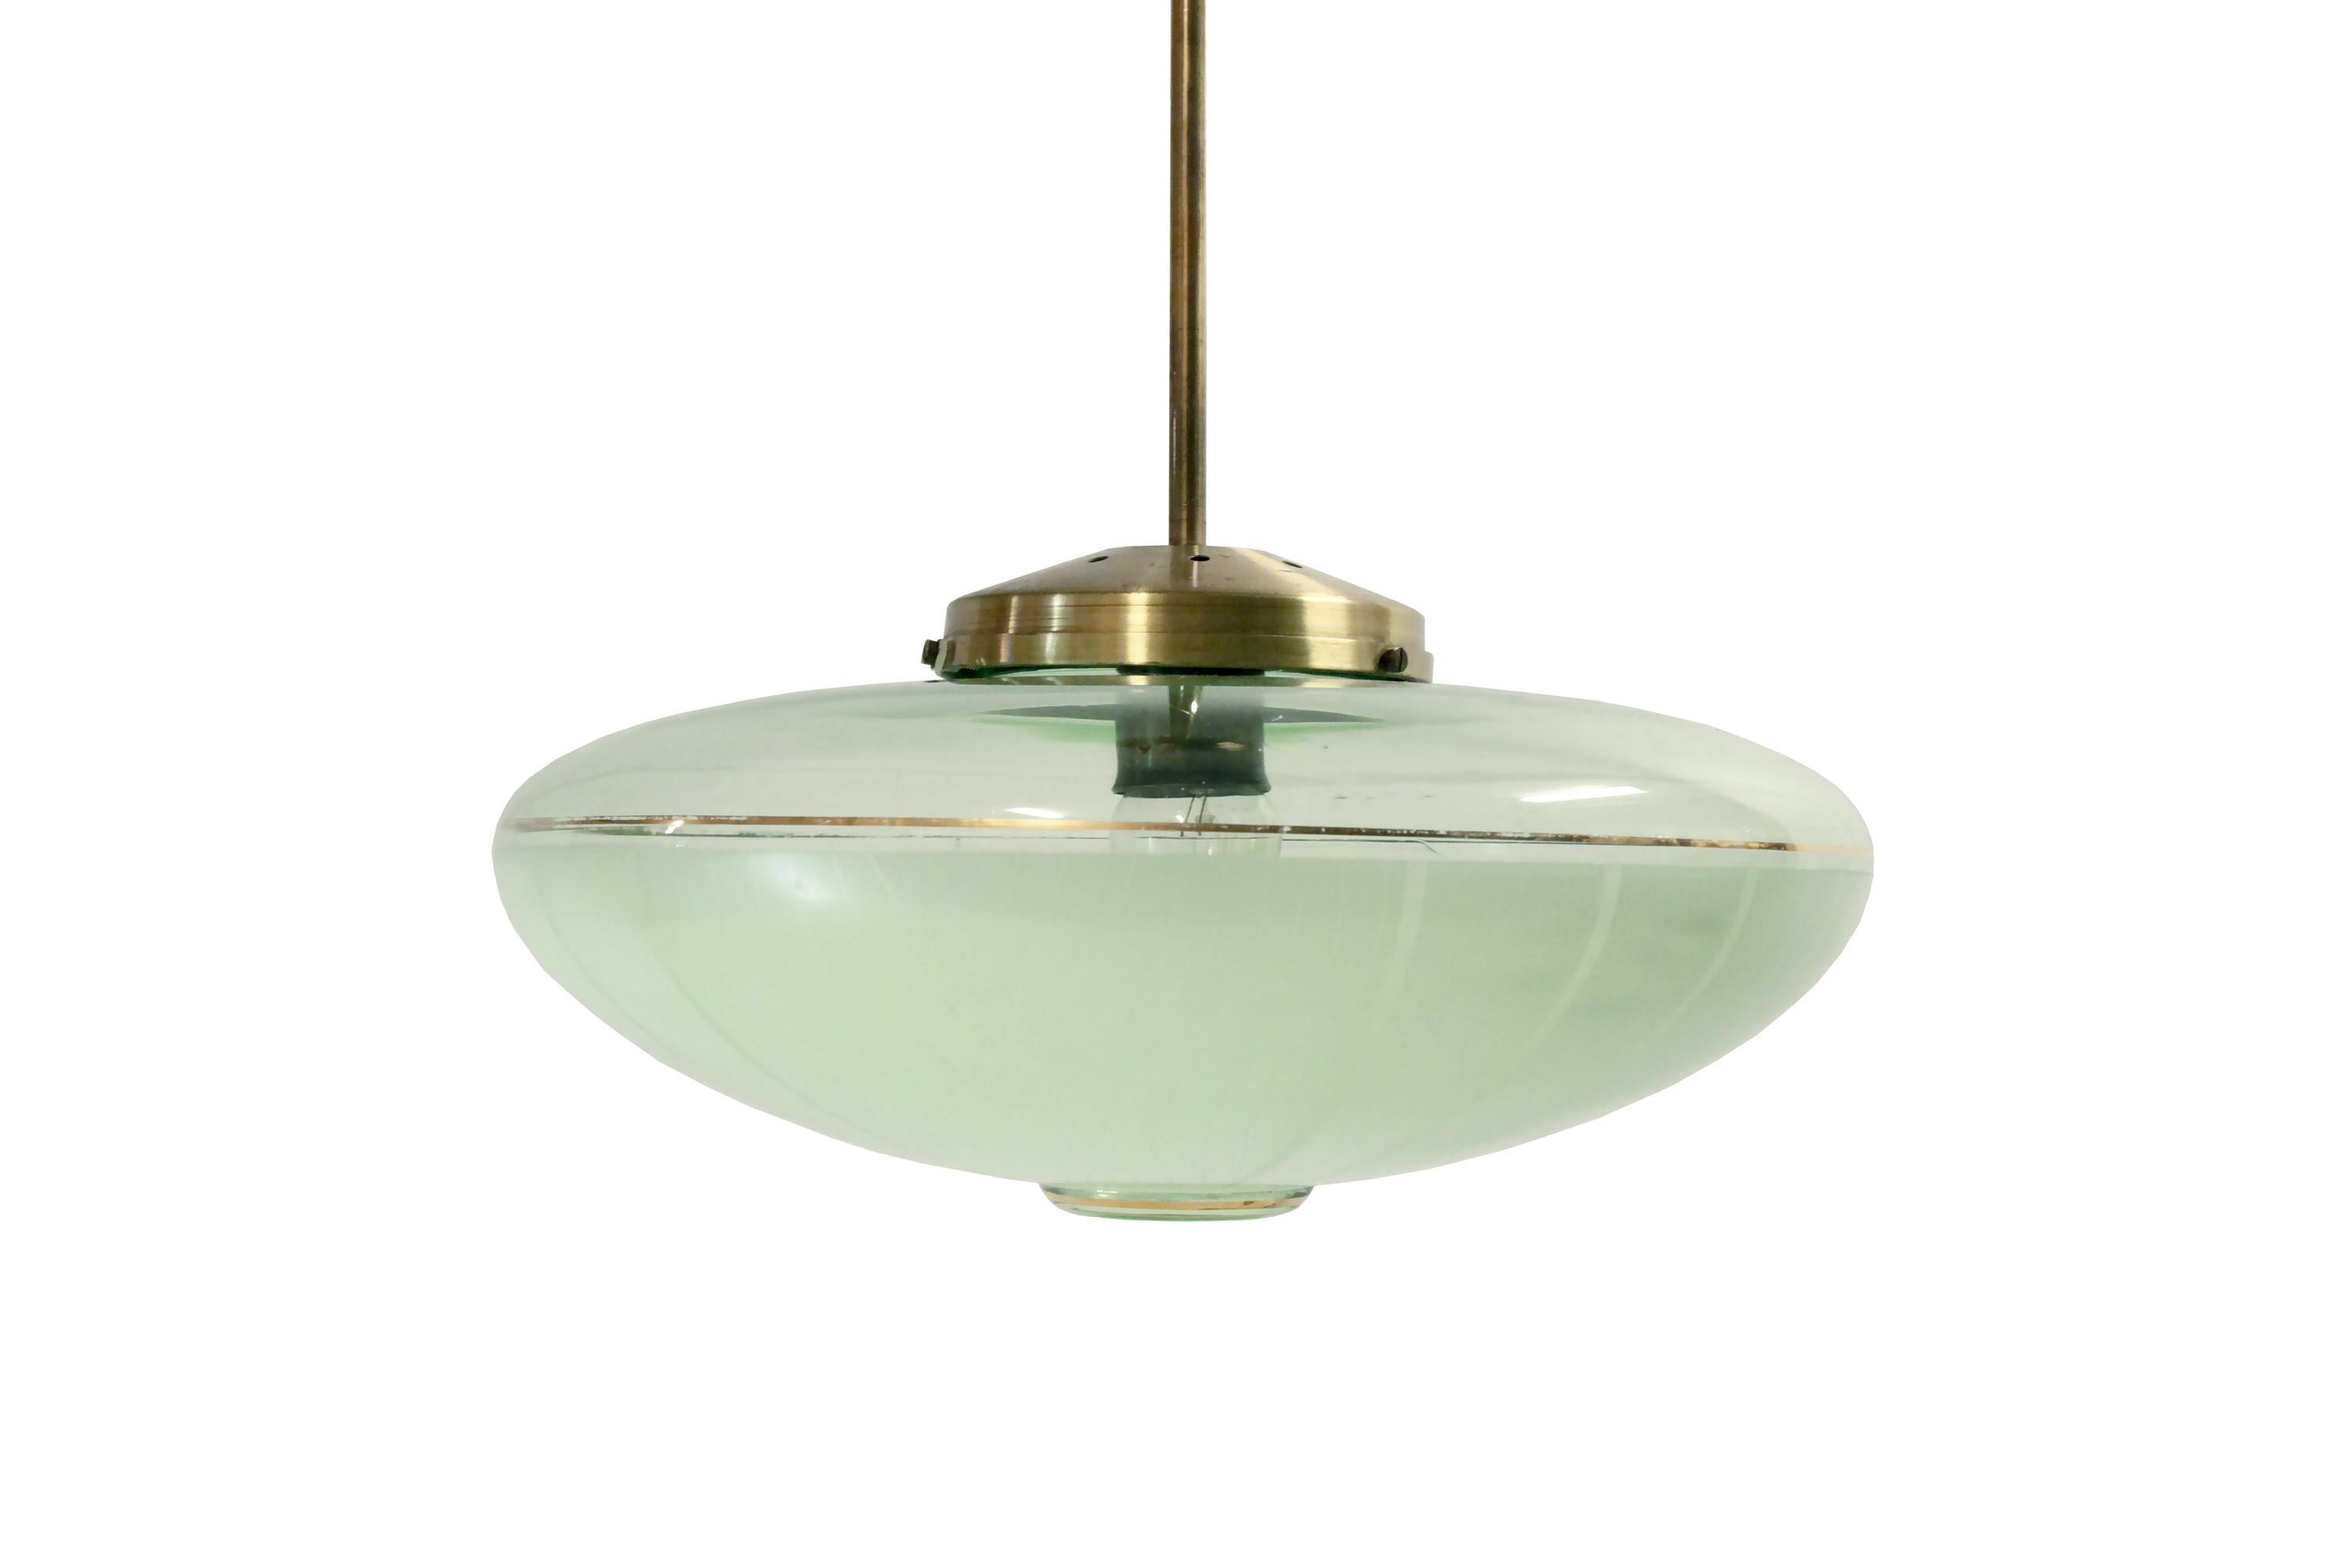 Wonderful and decorative ceiling lamp. Designed and made in Sweden by ASEA during the late 1960s. The lamp is fully working and in very good vintage condition.